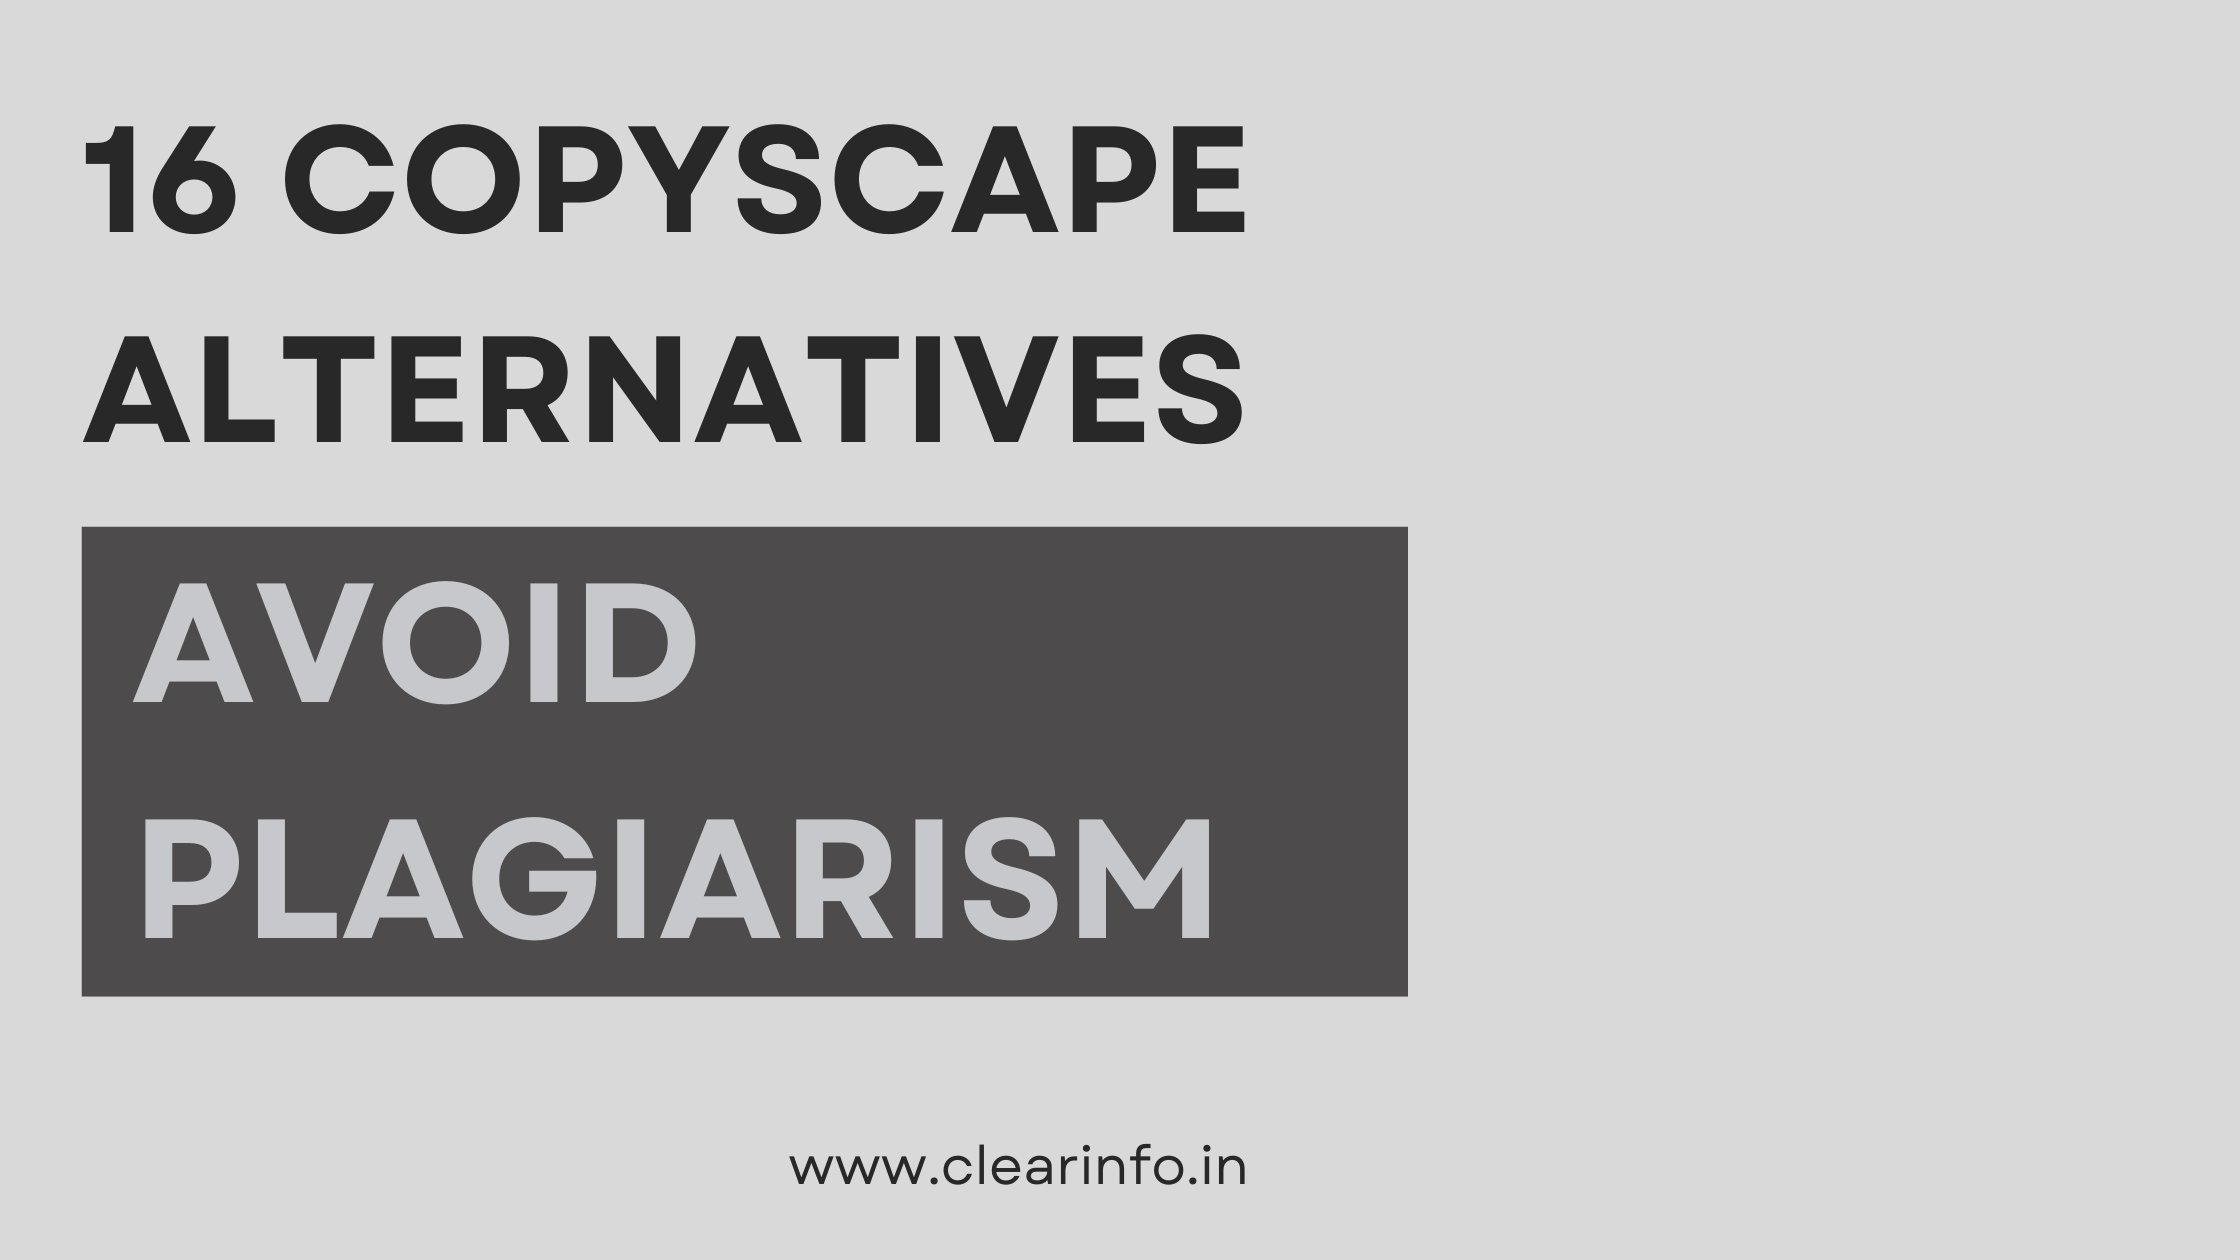 16 Best Copyscape Alternatives To Avoid Plagiarism (Free & Paid) In 2023